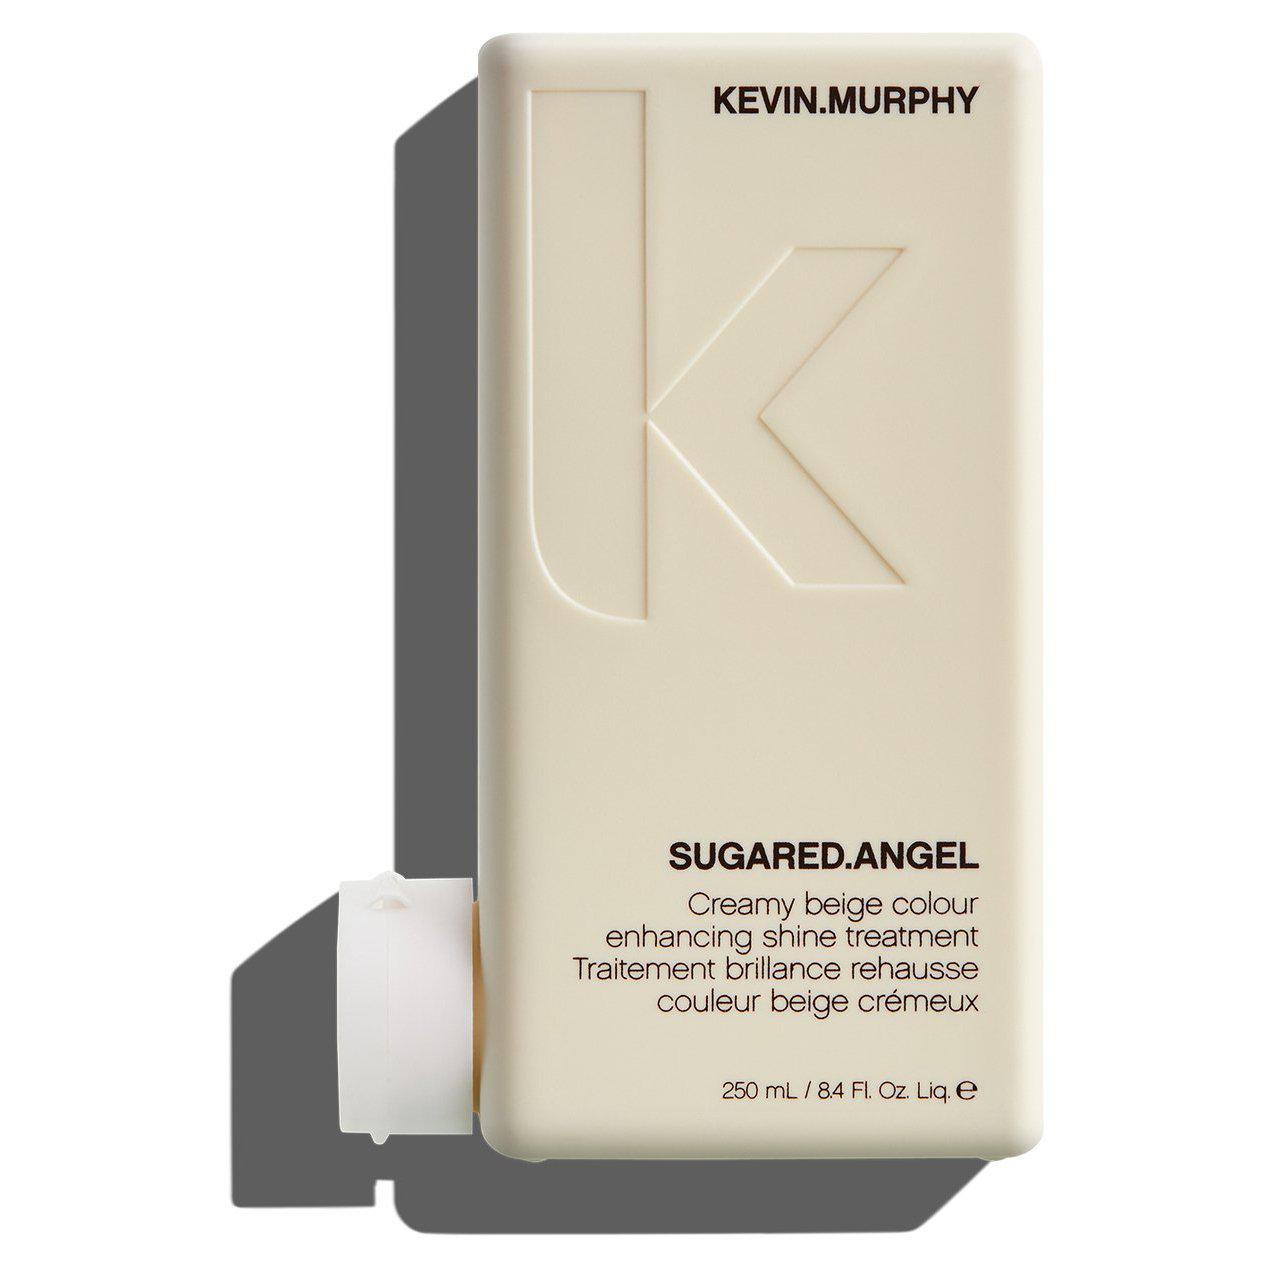 Kevin Murphy sugared.angel